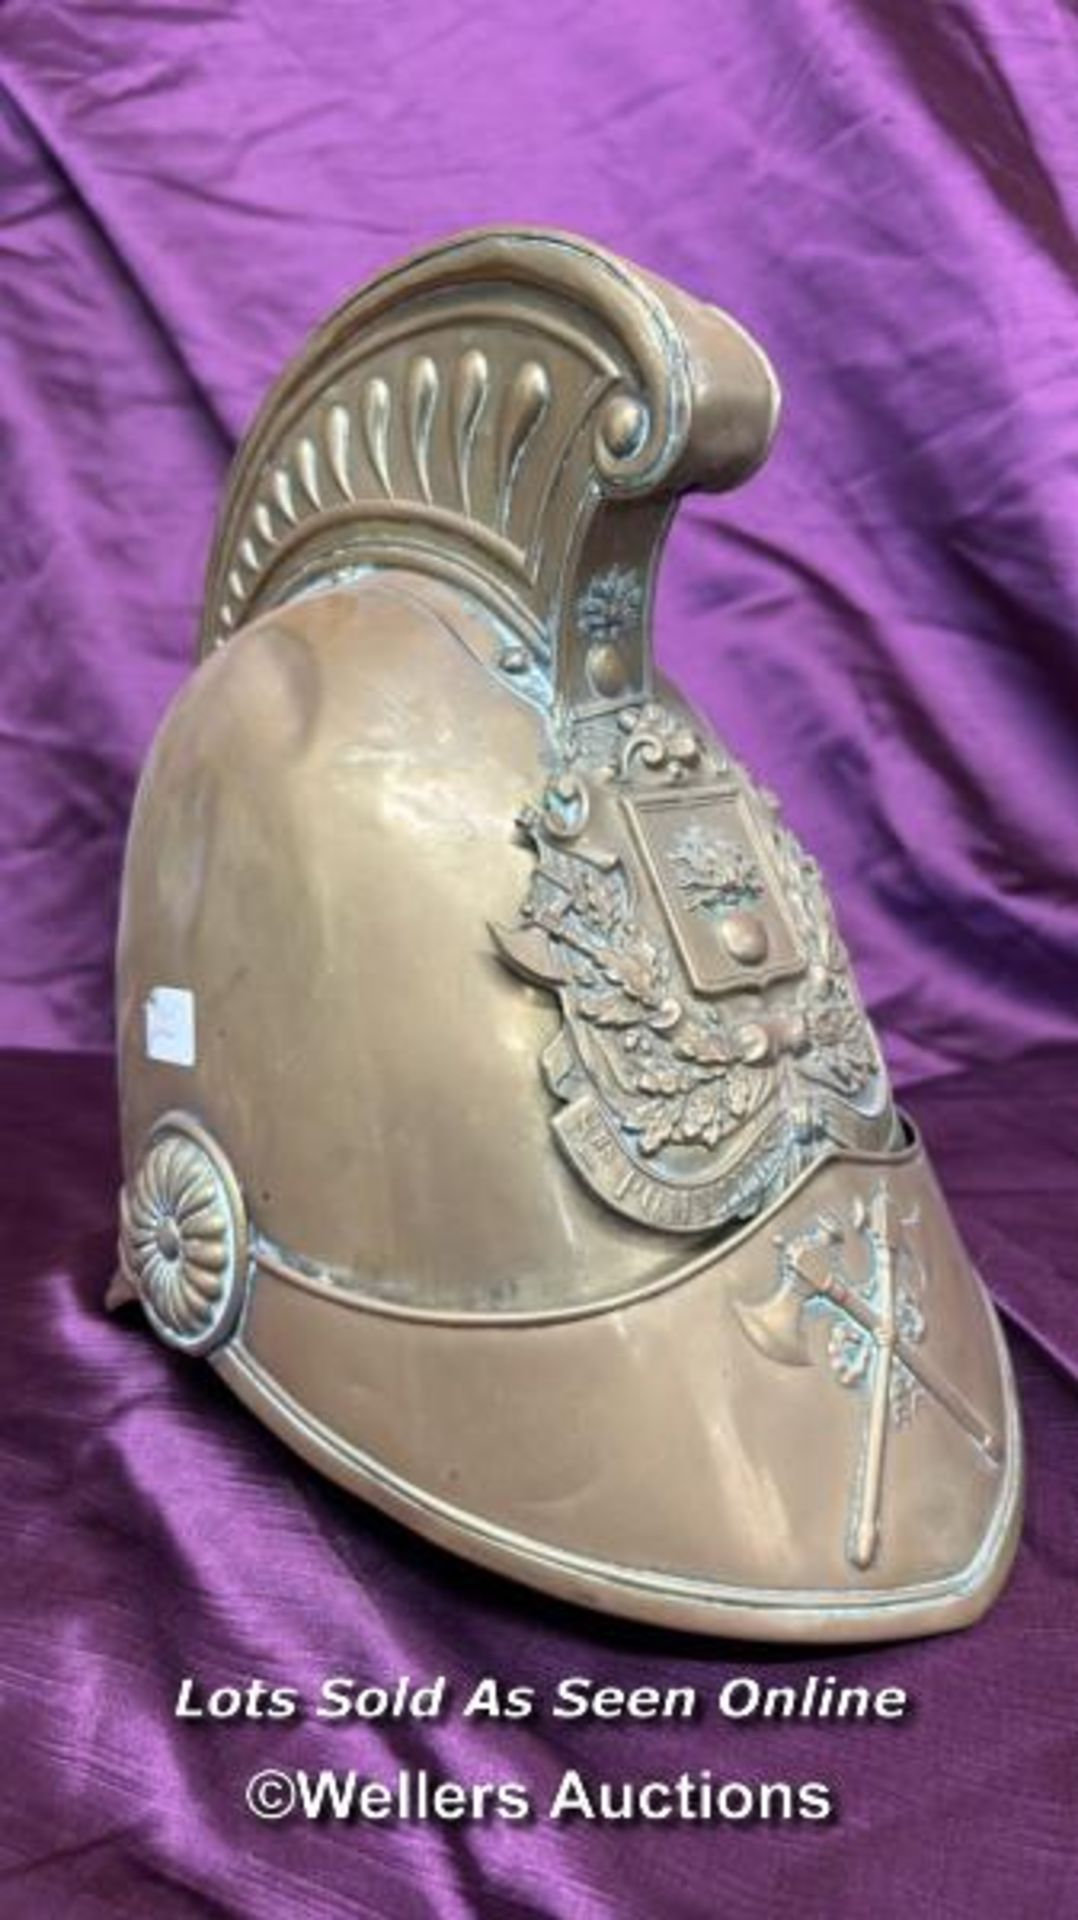 19TH CENTURY FRENCH SAPEURS-POMPIERS HELMET - Image 3 of 5